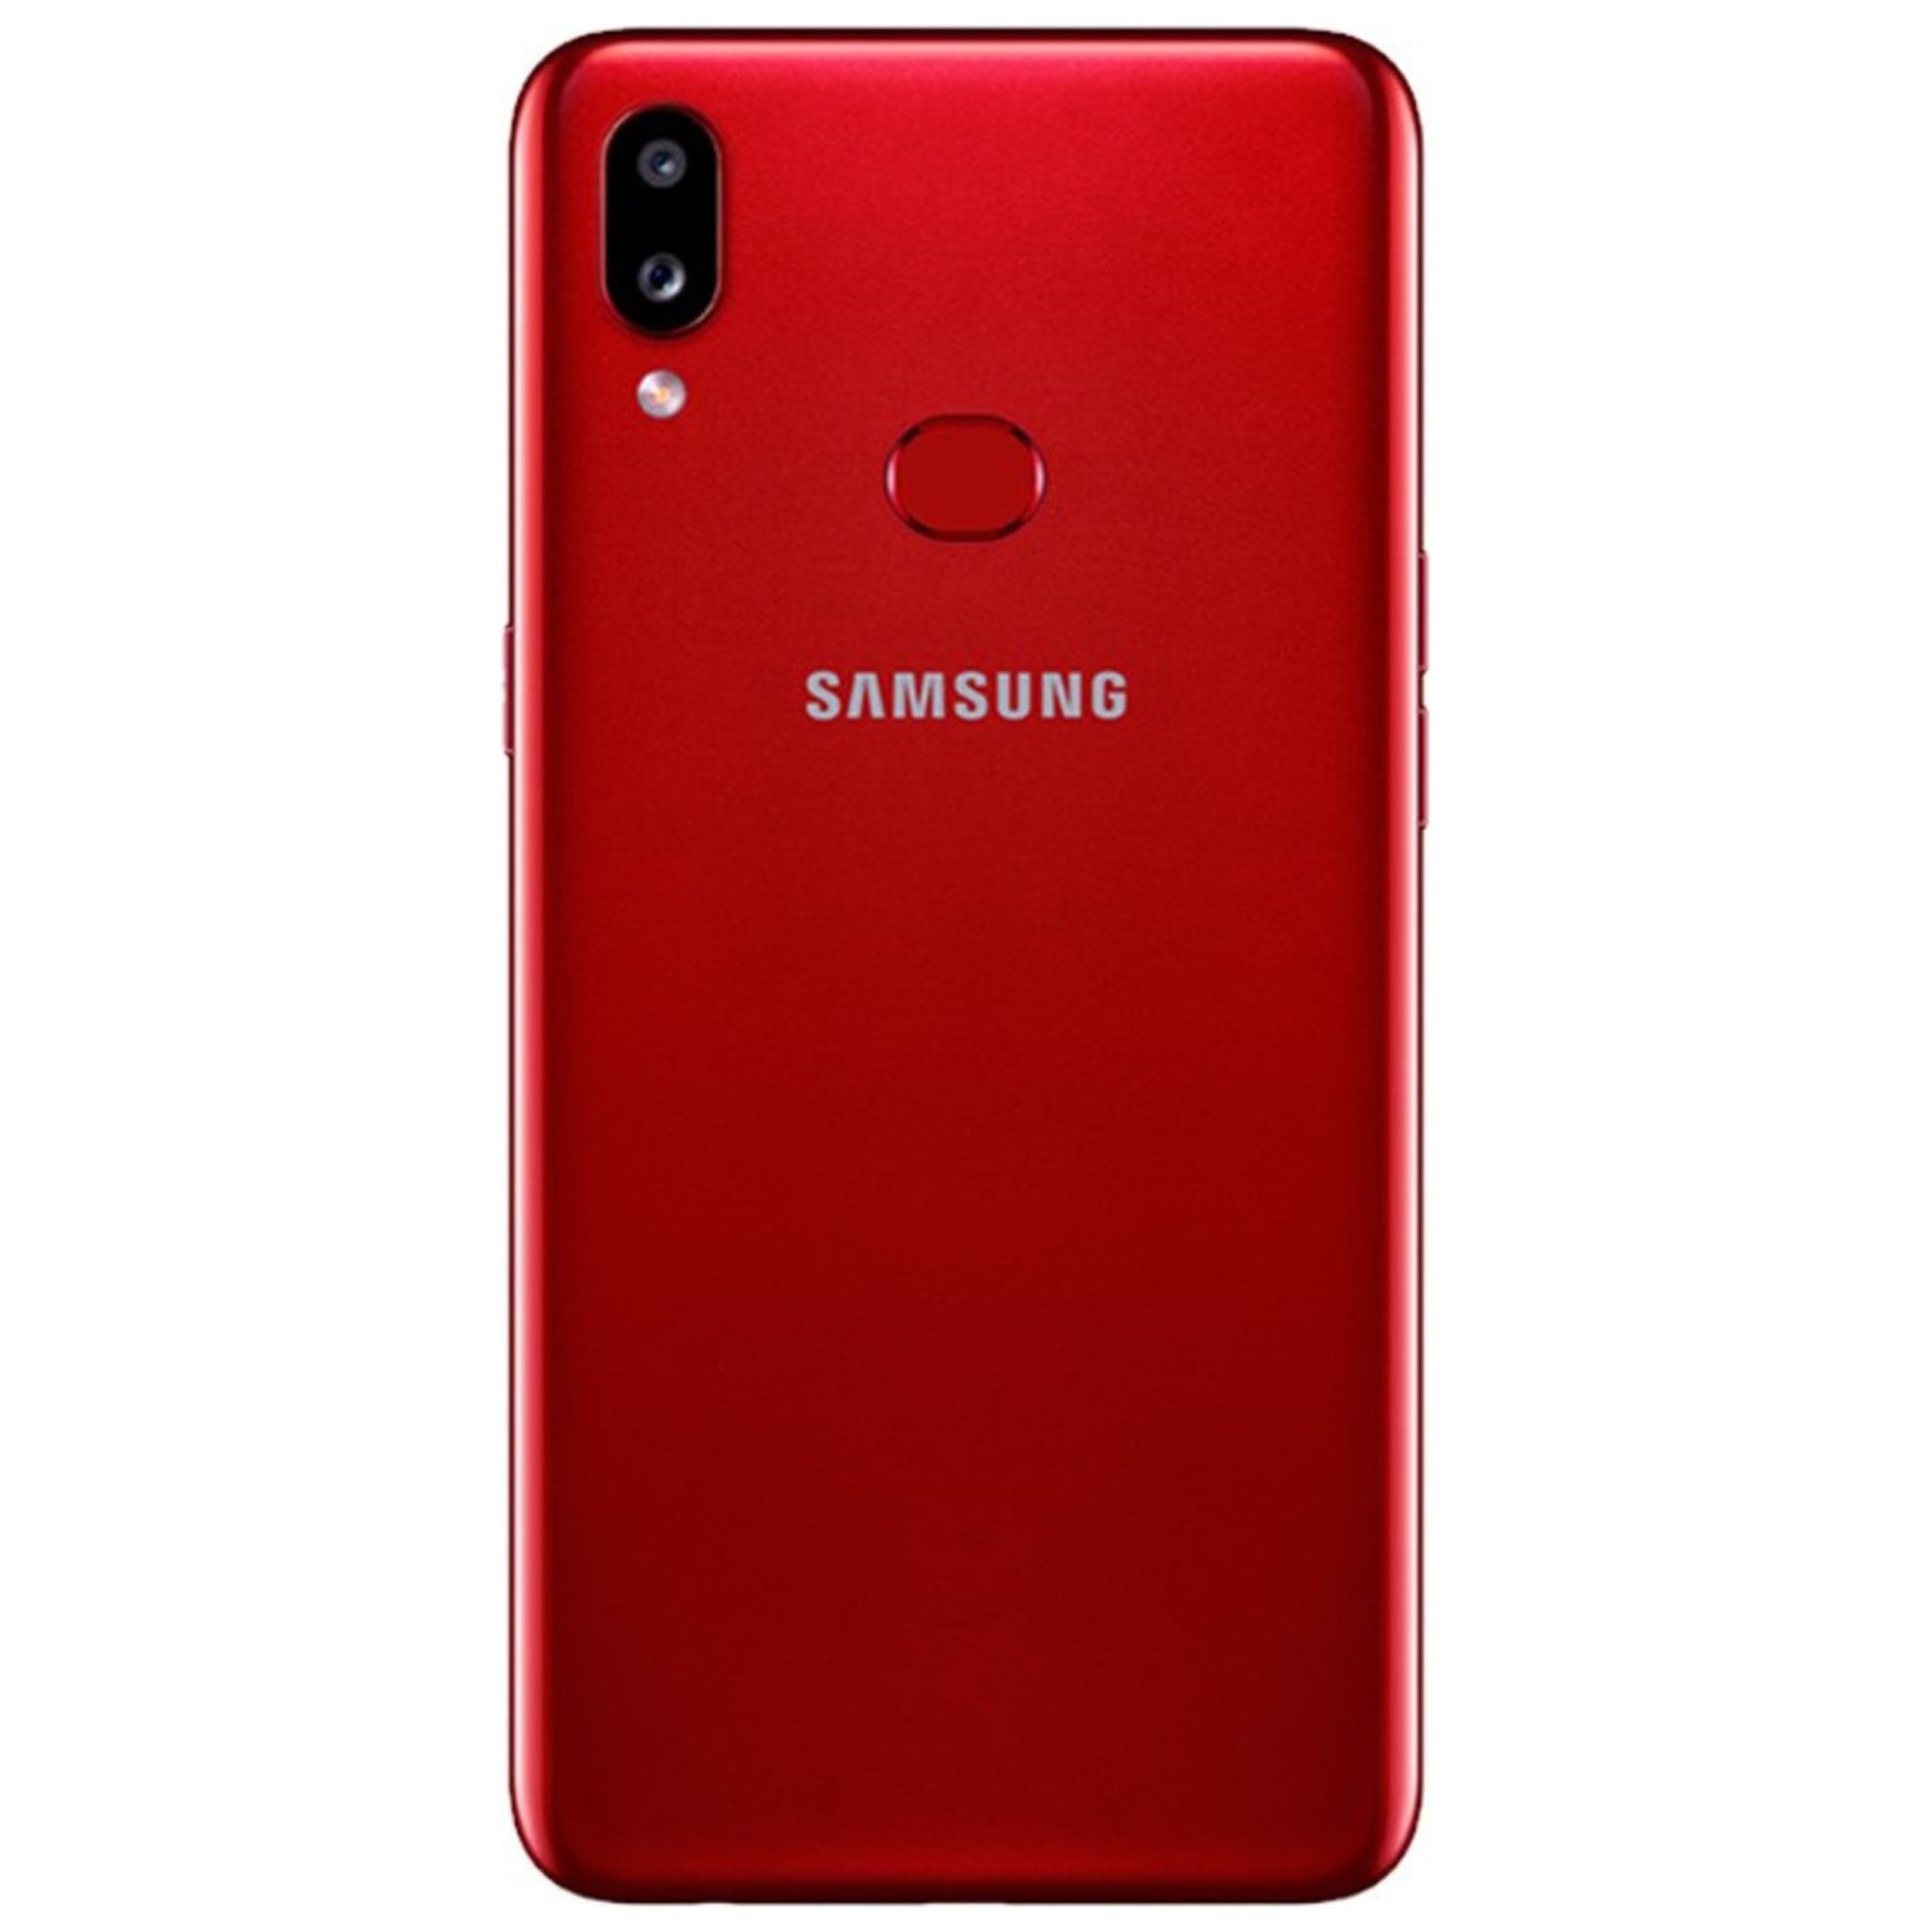 SAMSUNG Galaxy A10S A107M, 32GB, GSM Unlocked Dual SIM (International Variant/US Compatible LTE) – Red - image 3 of 4